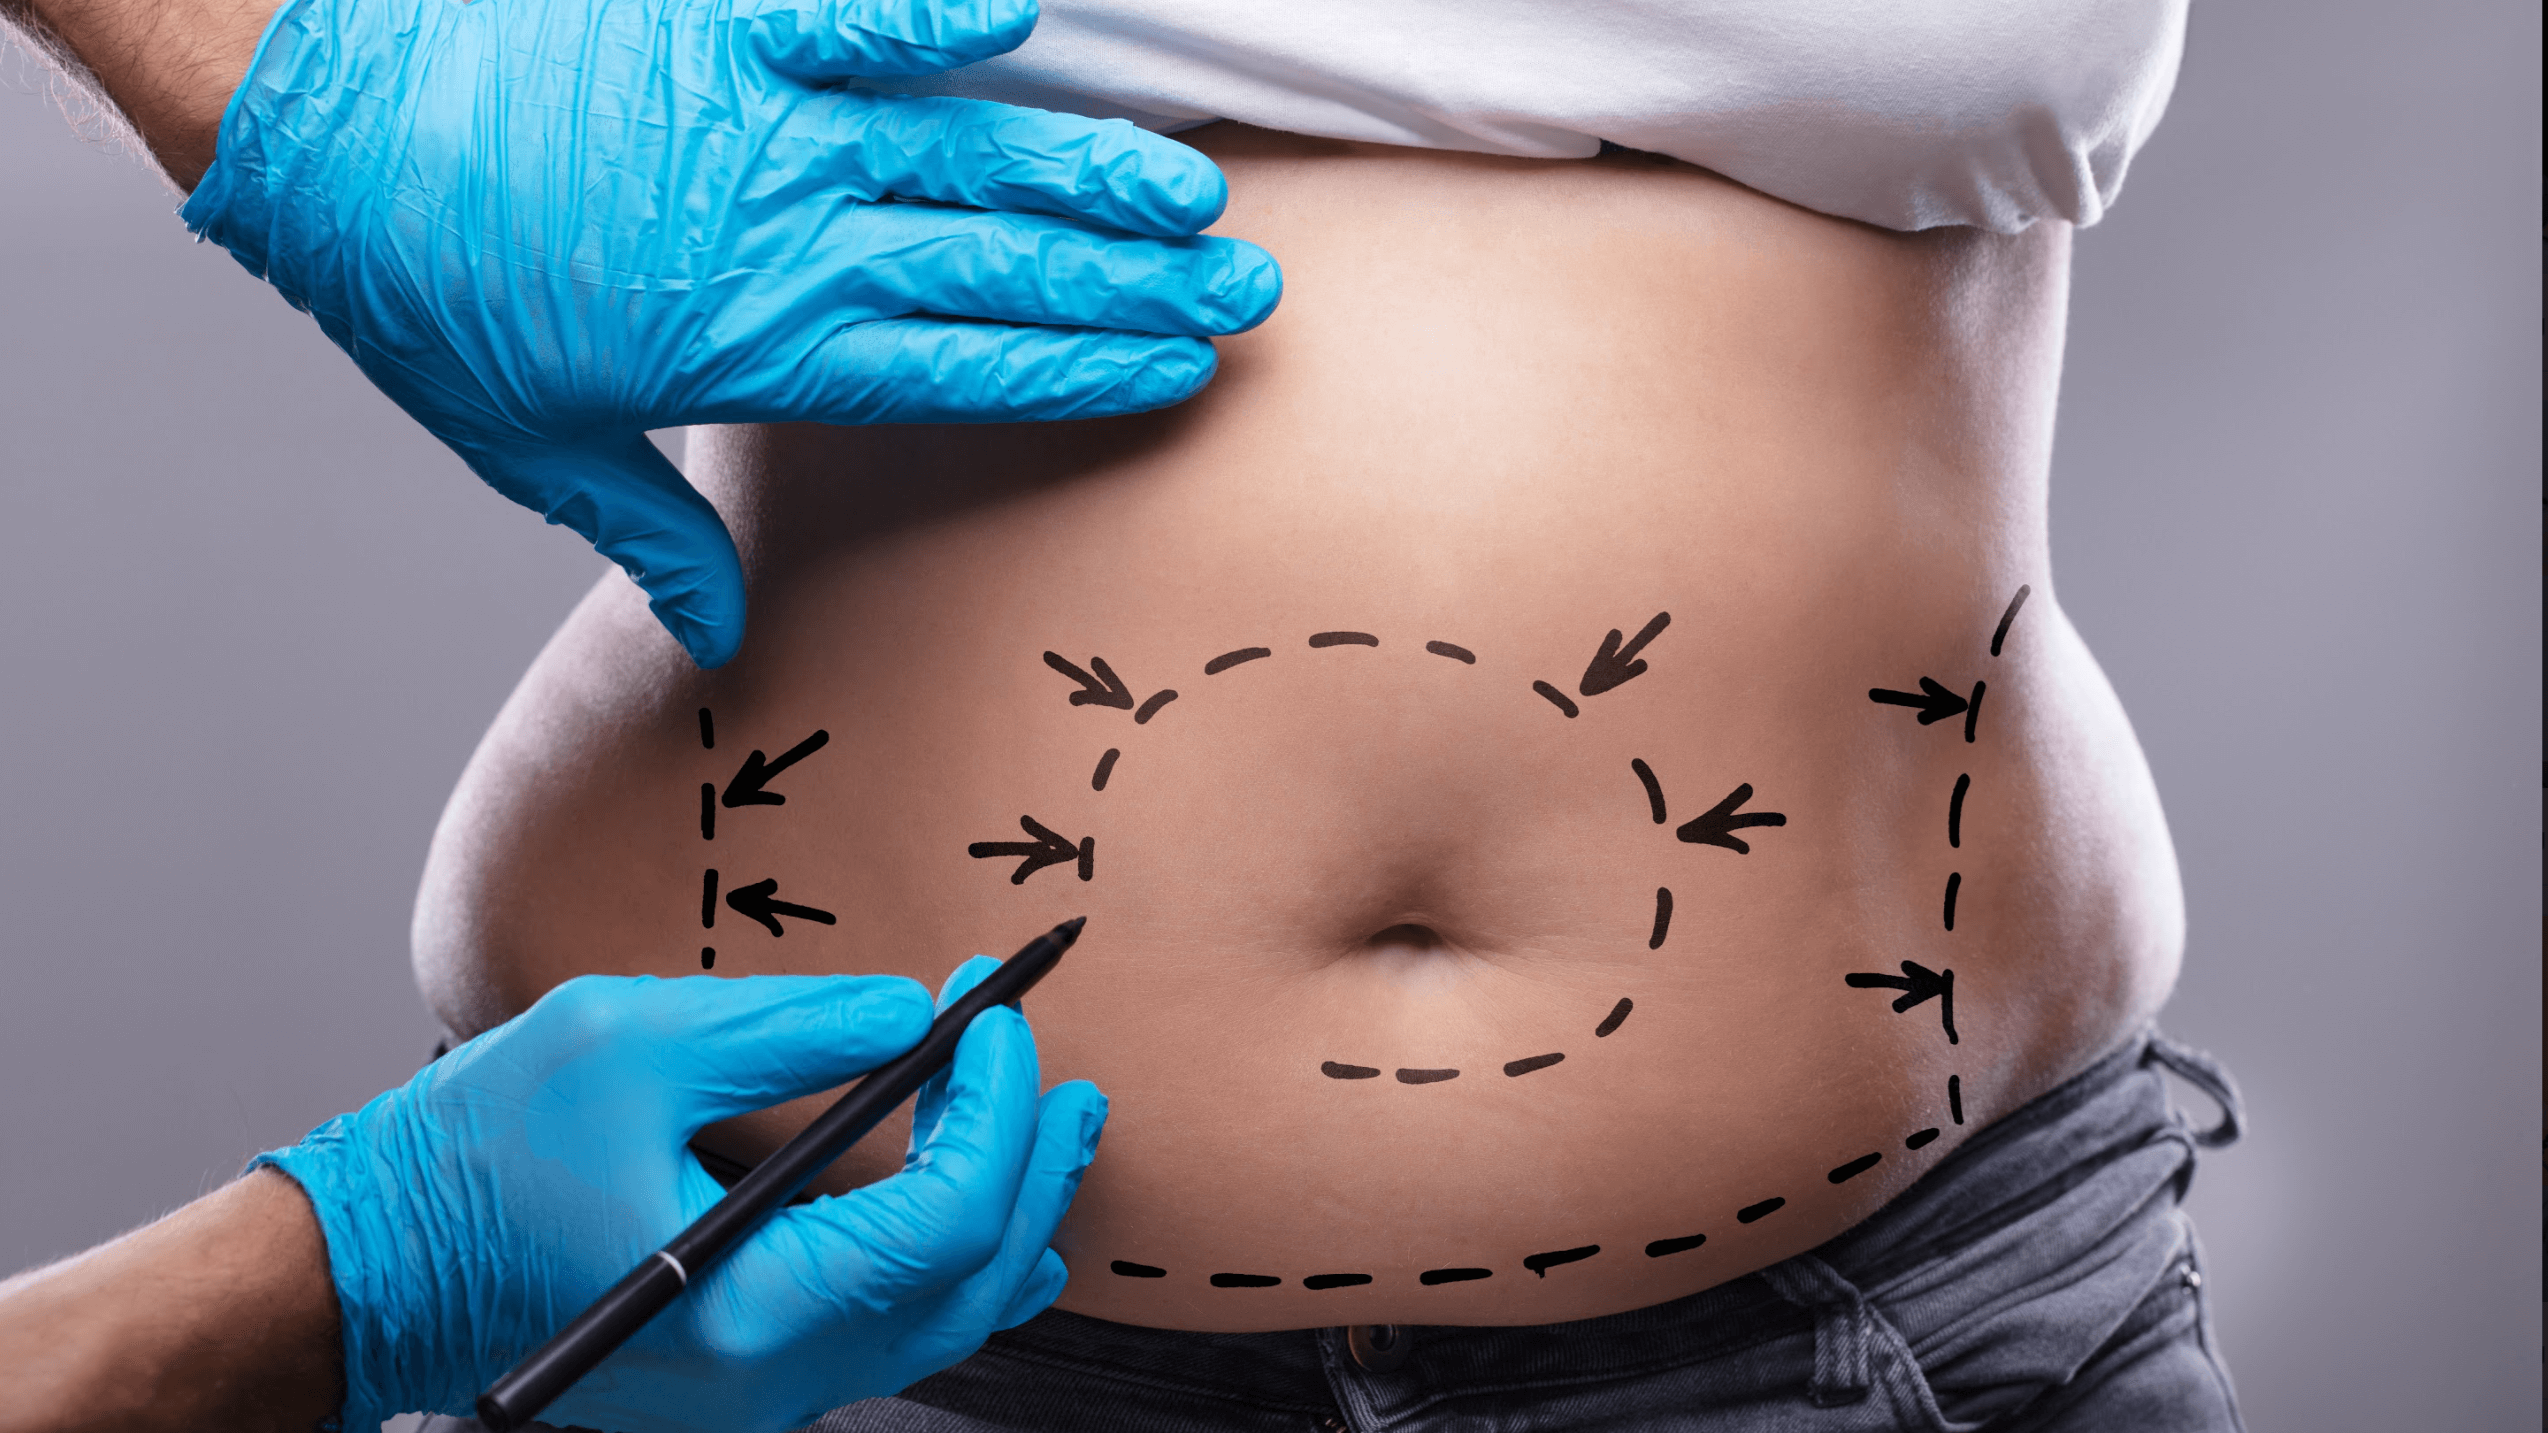 How to Prepare in Advance for Tummy Tuck Surgery